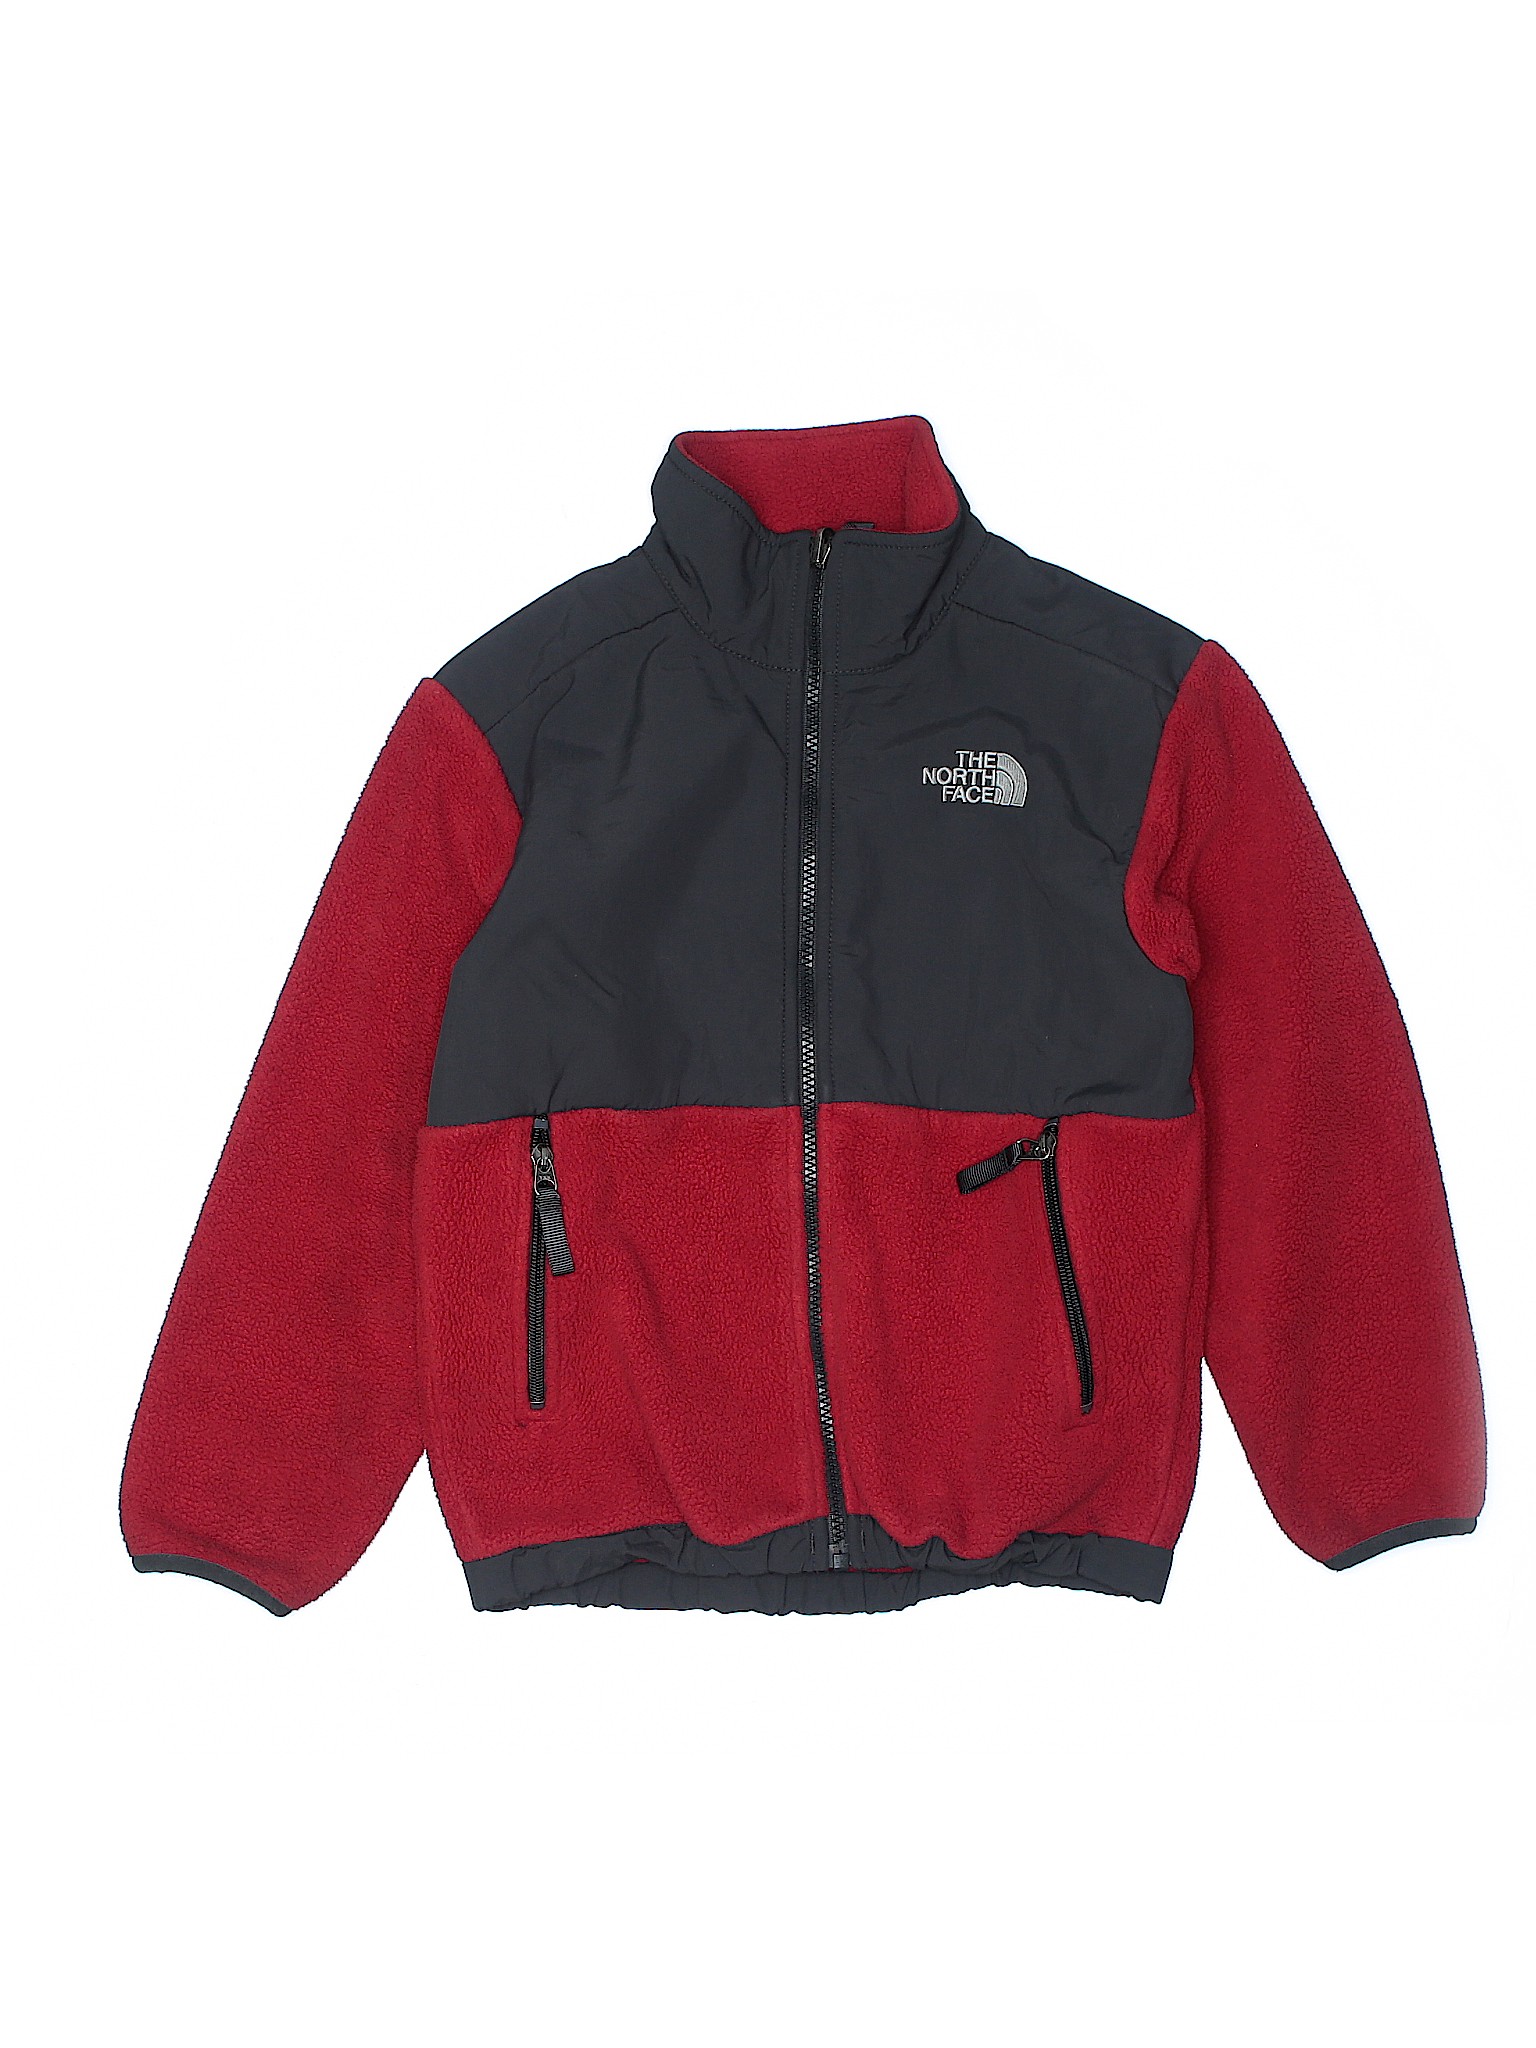 The North Face Boys Red Fleece Jacket S Youth | eBay